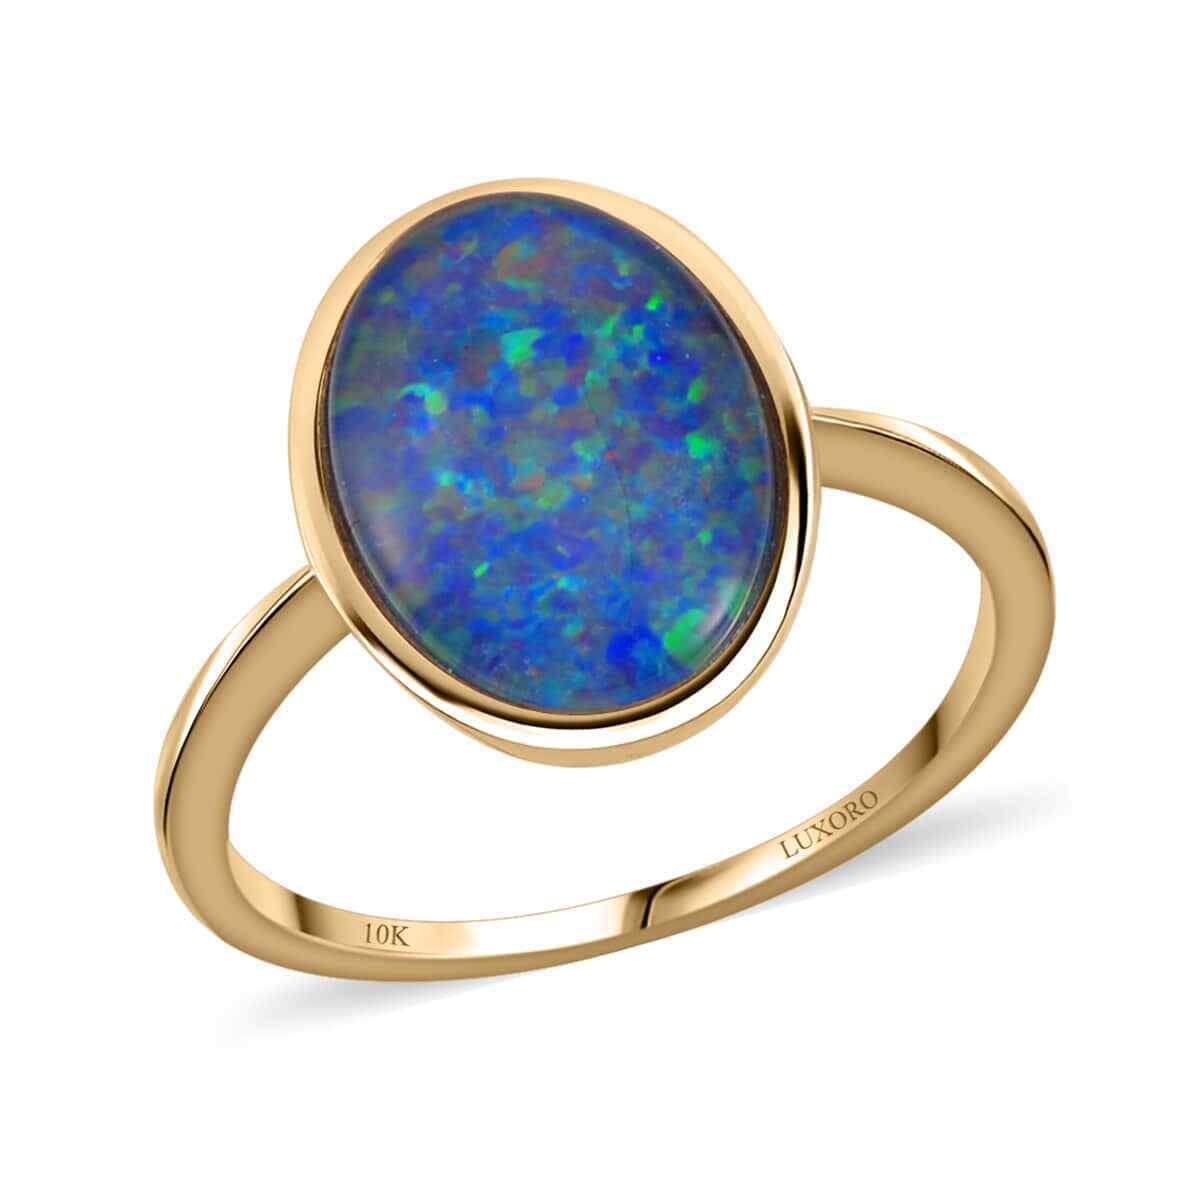 LUXORO 10K Yellow Gold Lab Created Opal Triplet Solitaire Ring Size 6 Ct 3.4